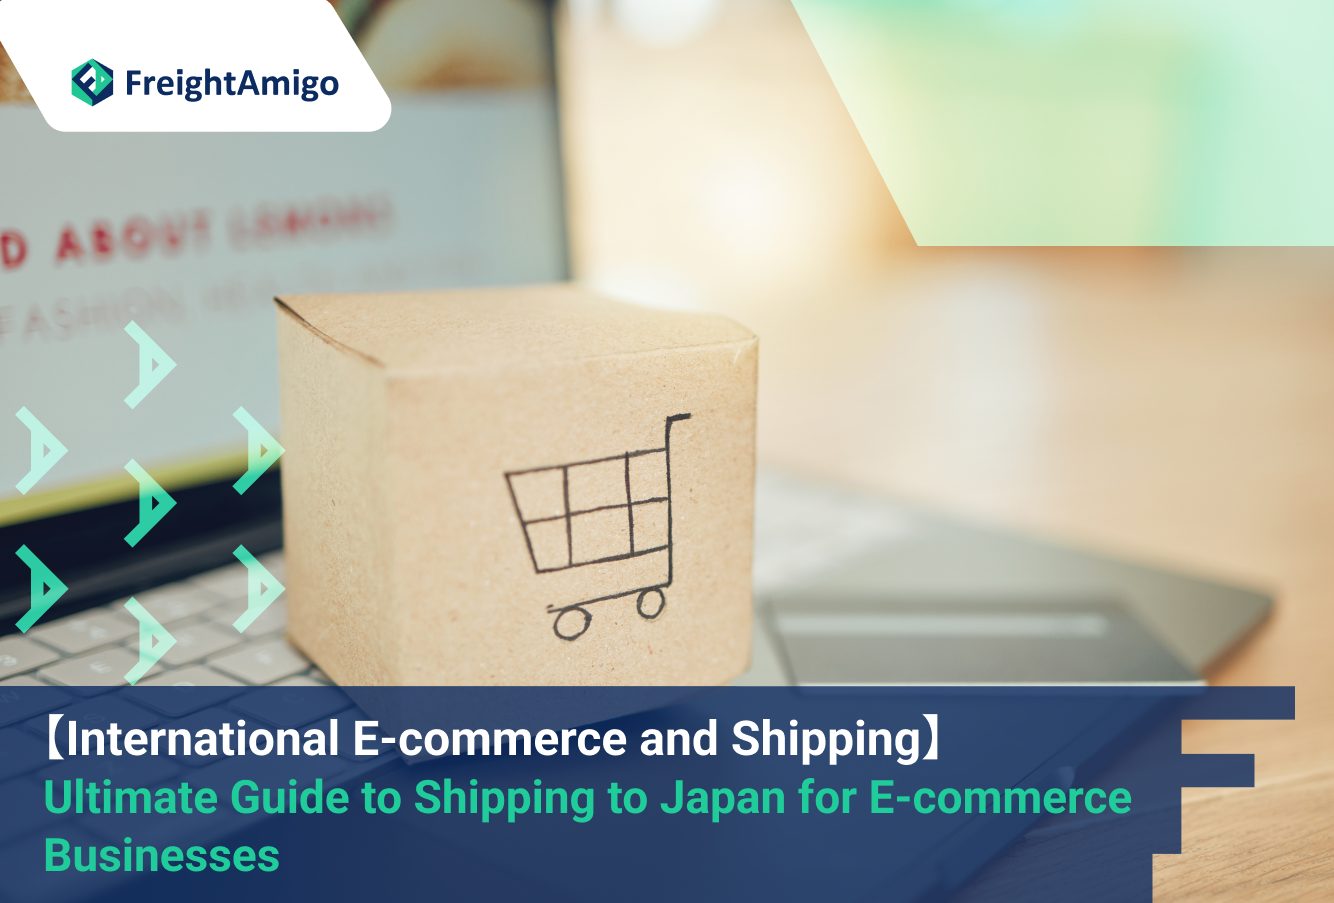 【International E-commerce and Shipping】 The Ultimate Guide to Shipping to Japan for E-commerce Businesses, FreightAmigo